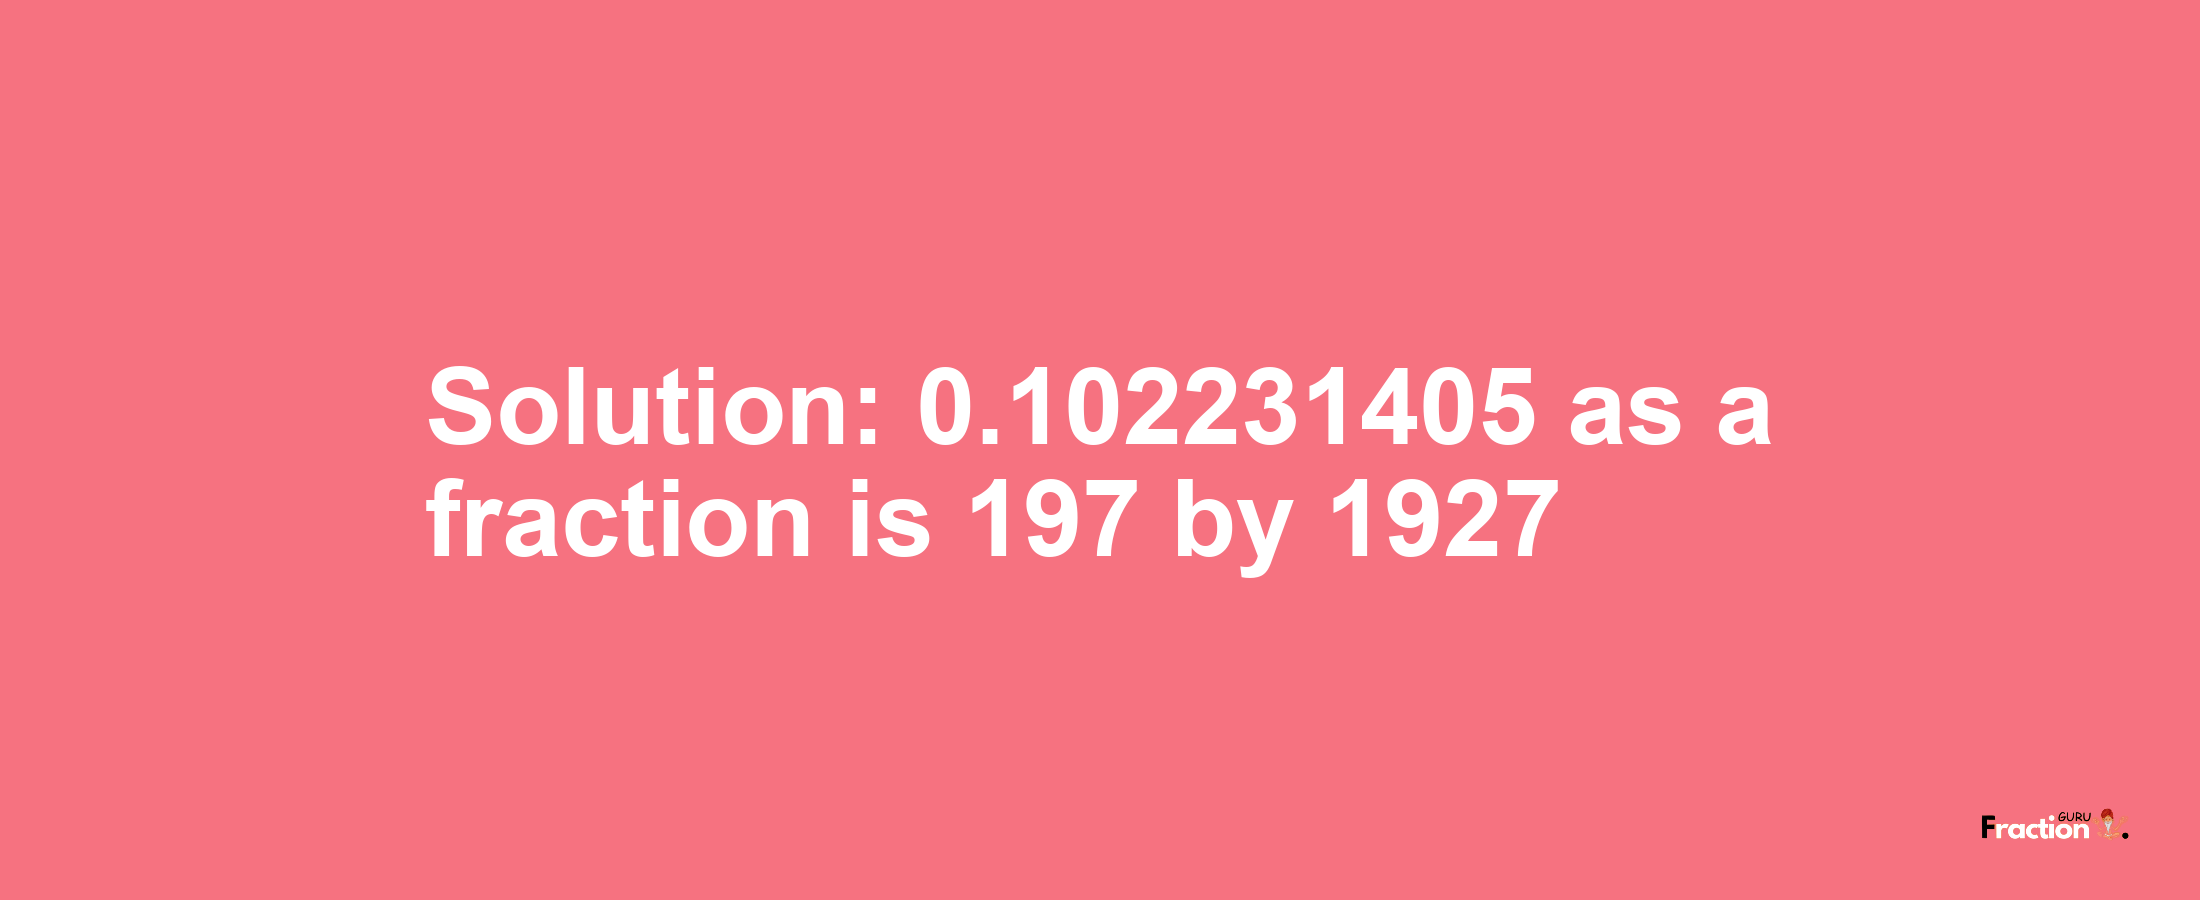 Solution:0.102231405 as a fraction is 197/1927